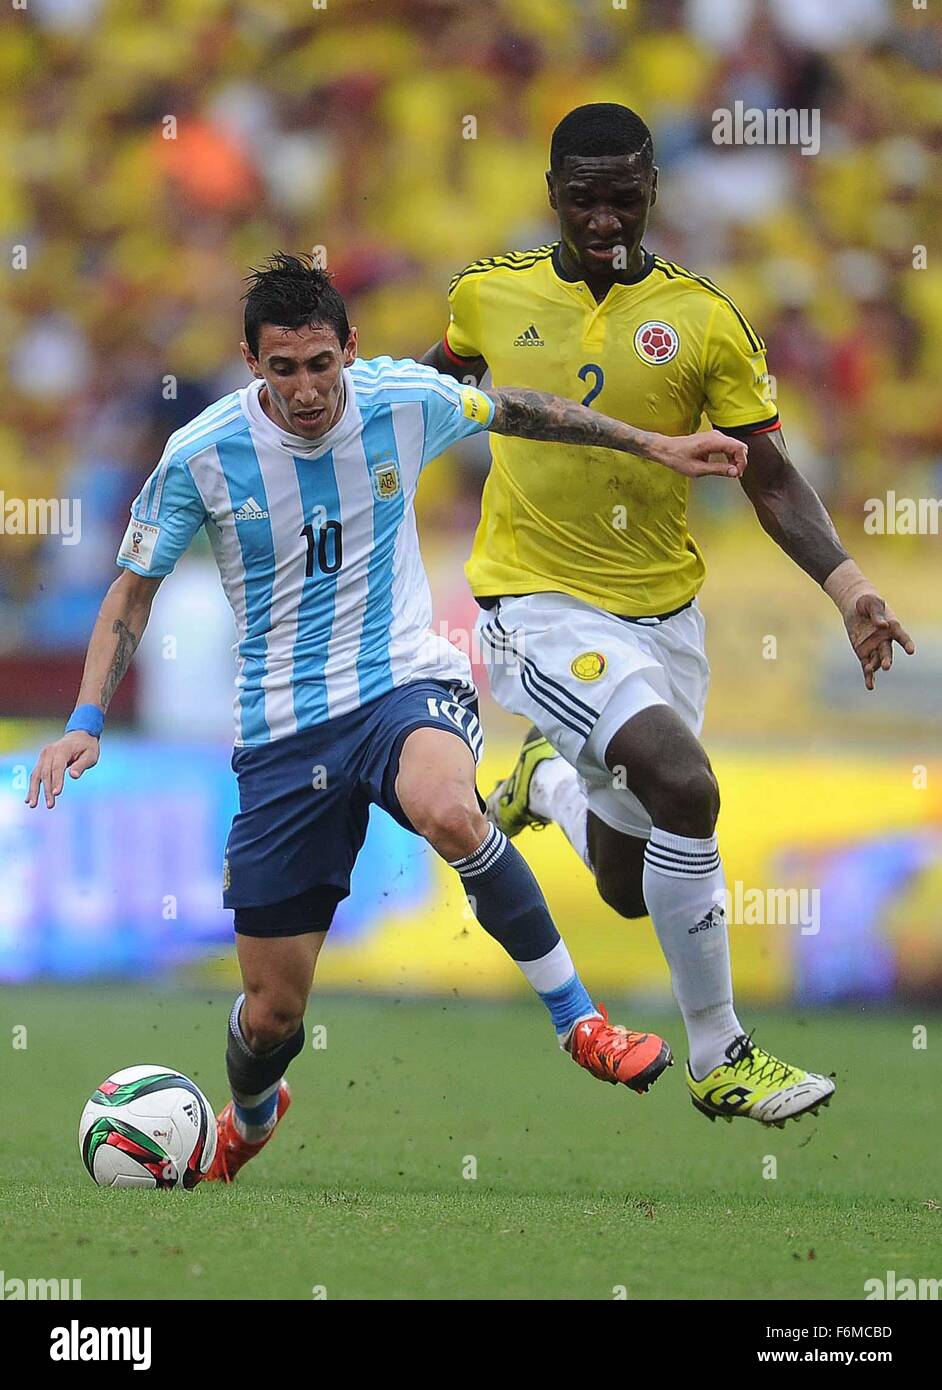 Barranquilla, Colombia. 17th Nov, 2015. Colombia's Cristian Zapata (R) vies with Argentina's Angel Di Maria during a 2018 Russia World Cup qualifying match between Colombia and Argentina, at the Metropolitano Roberto Melendez Stadium in Barranquilla, Colombia, on Nov. 17, 2015. Argentina won the game 1-0. Credit:  Fernando Gens/TELAM/Xinhua/Alamy Live News Stock Photo